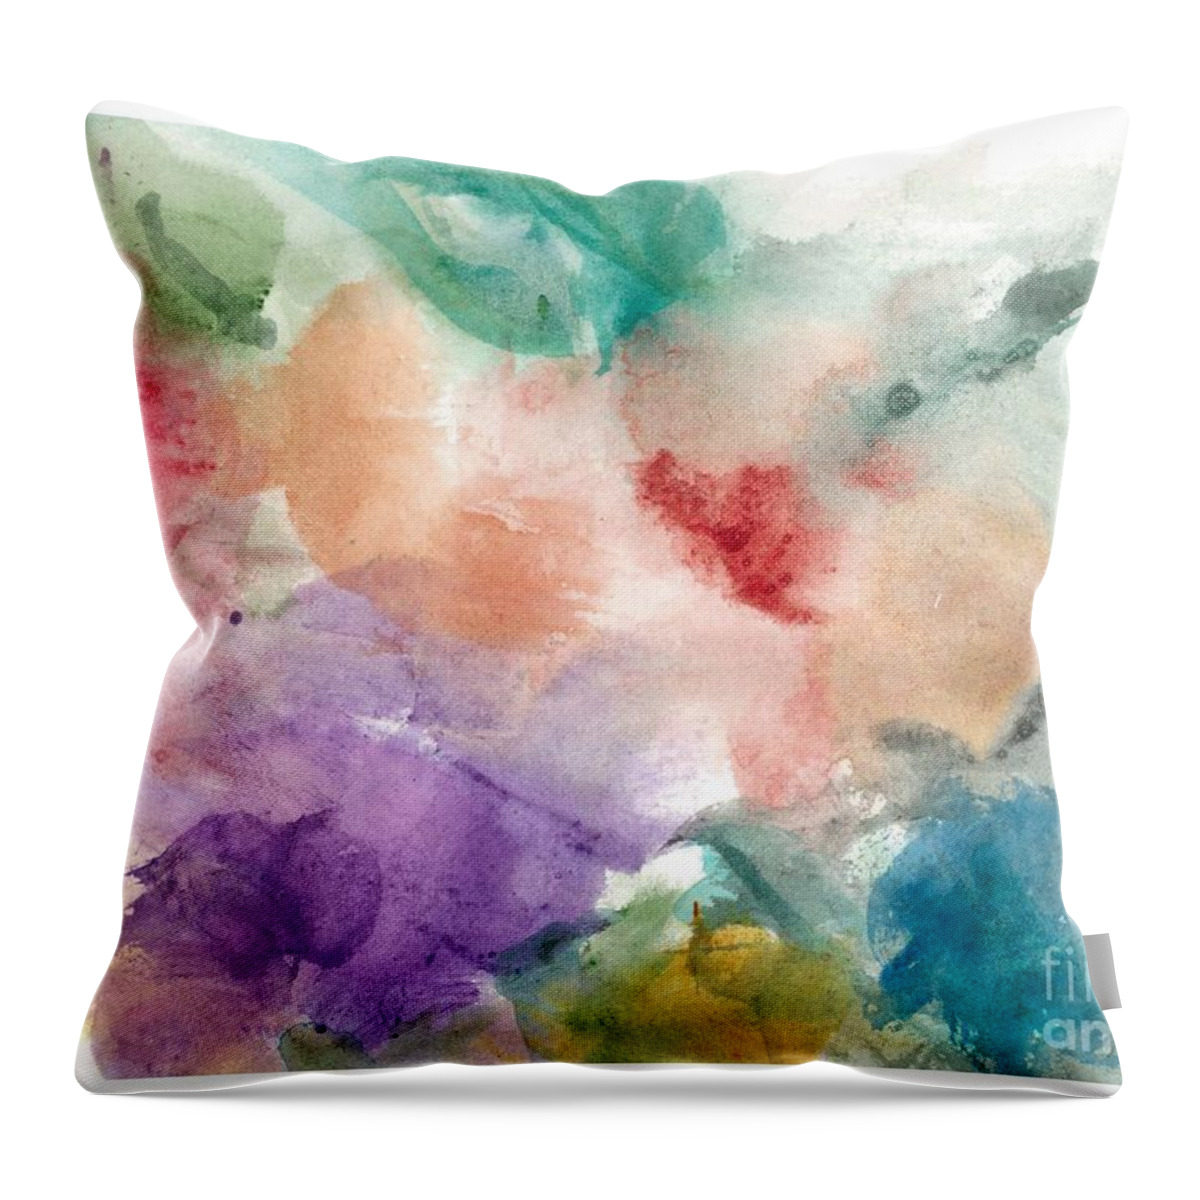 Water Throw Pillow featuring the painting Sky by Loretta Coca